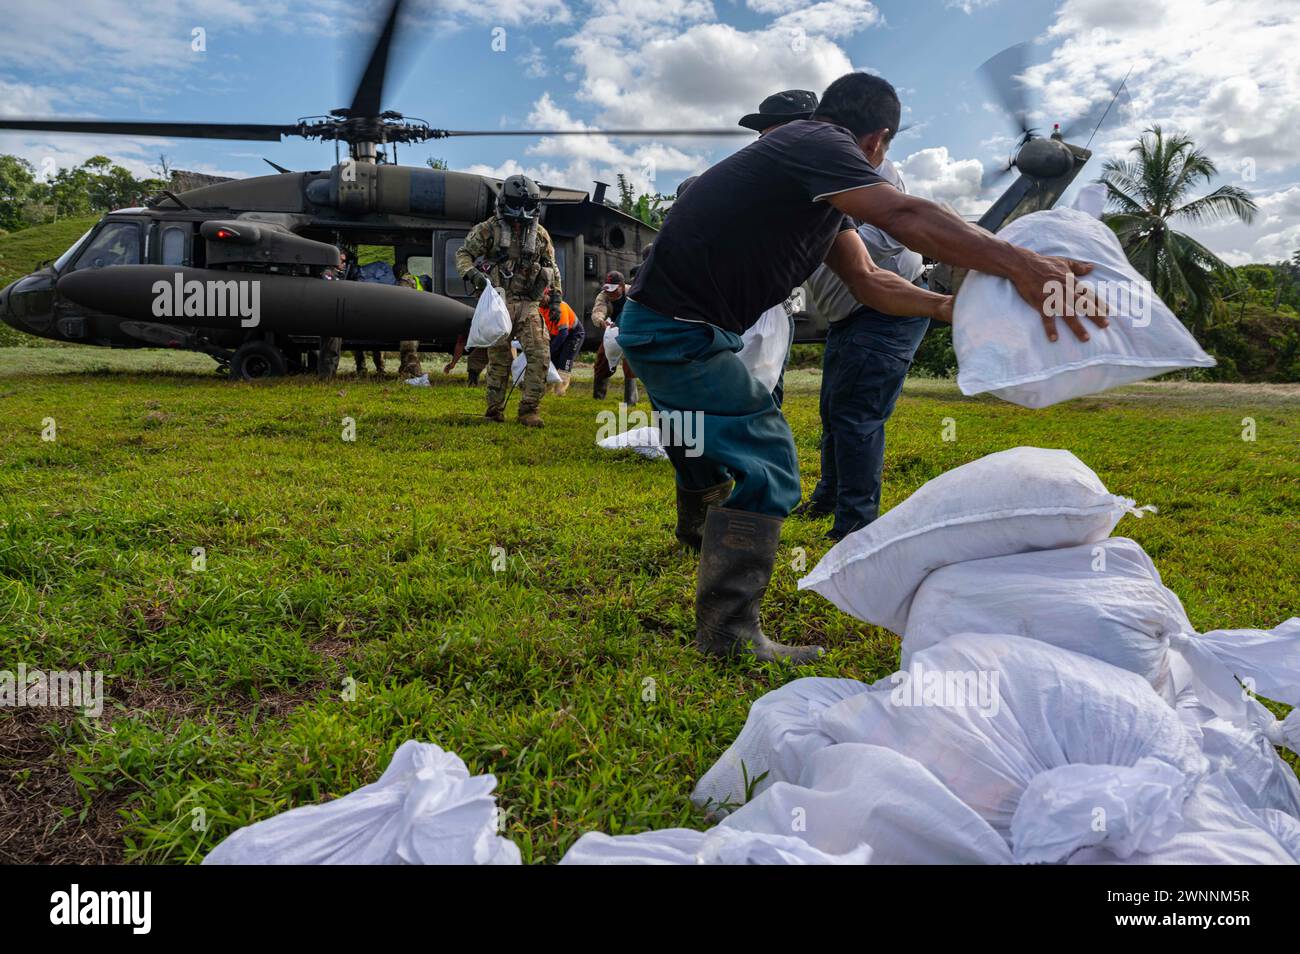 Rambala, Panama. 29 February, 2024. U.S. Army soldier and Panama civilians unload food and structural materials from a UH-60 Blackhawk helicopter during Exercise PANAMAX, February 29, 2024 near Rambala, Panama, Feb. 29, 2024. During the exercise the 1-228th Aviation Regiment transported over 500 thousand pounds of equipment including food and supplies as well as medical team to care for local residents.  Credit: TSgt. Nick Erwin/US Army/Alamy Live News Stock Photo